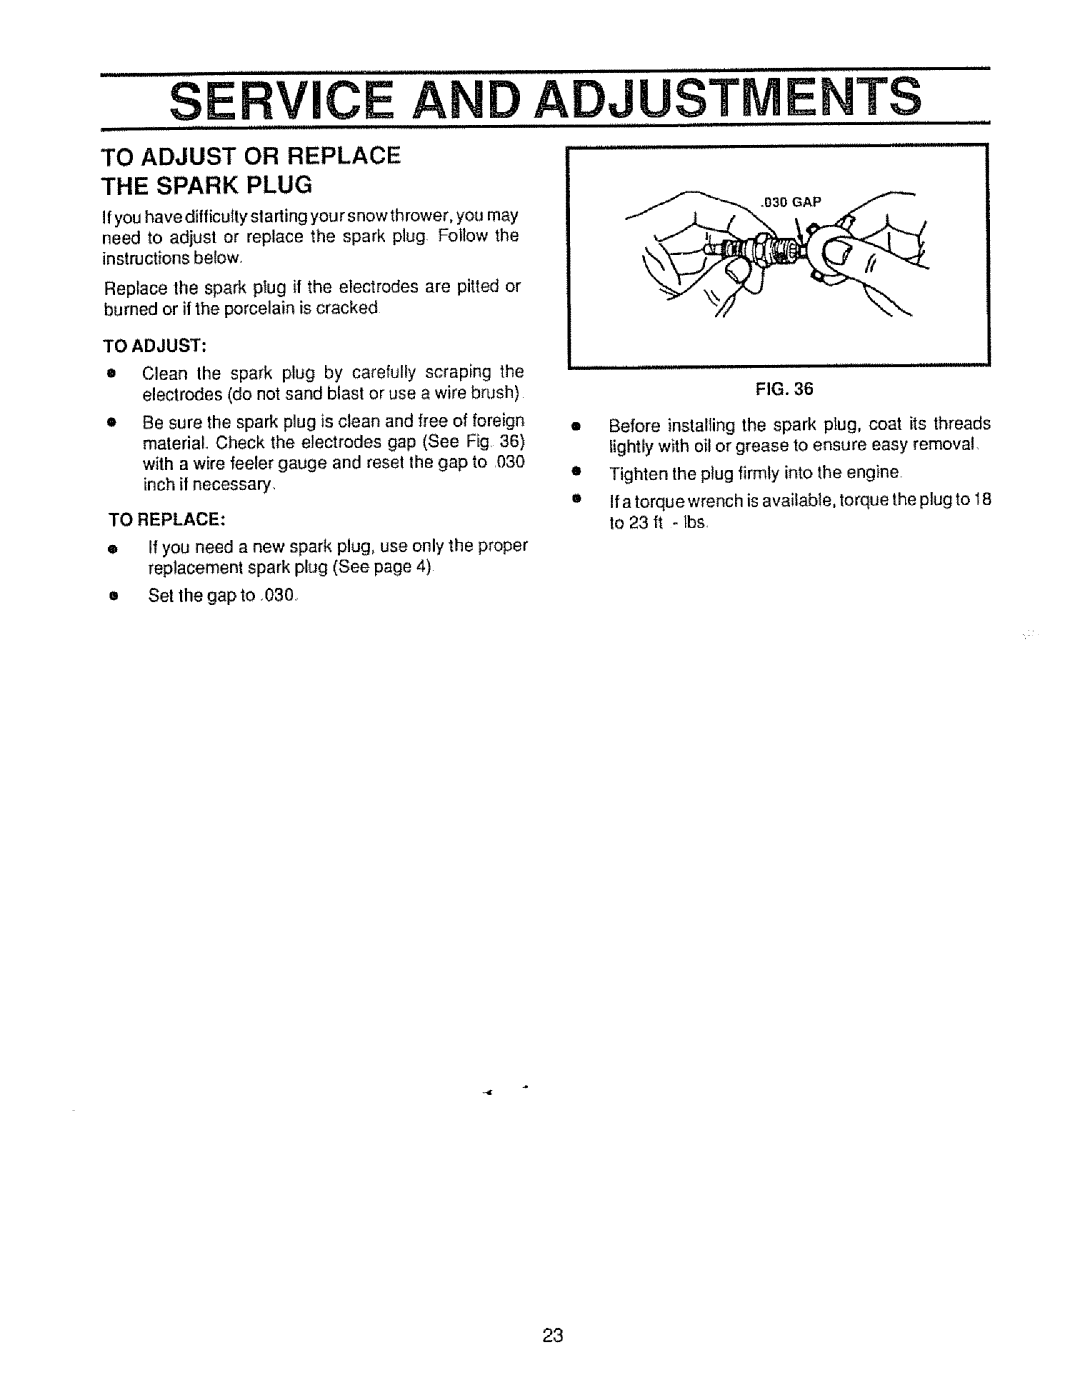 Sears 536.886531 owner manual To Adjust or Replace, To Replace 